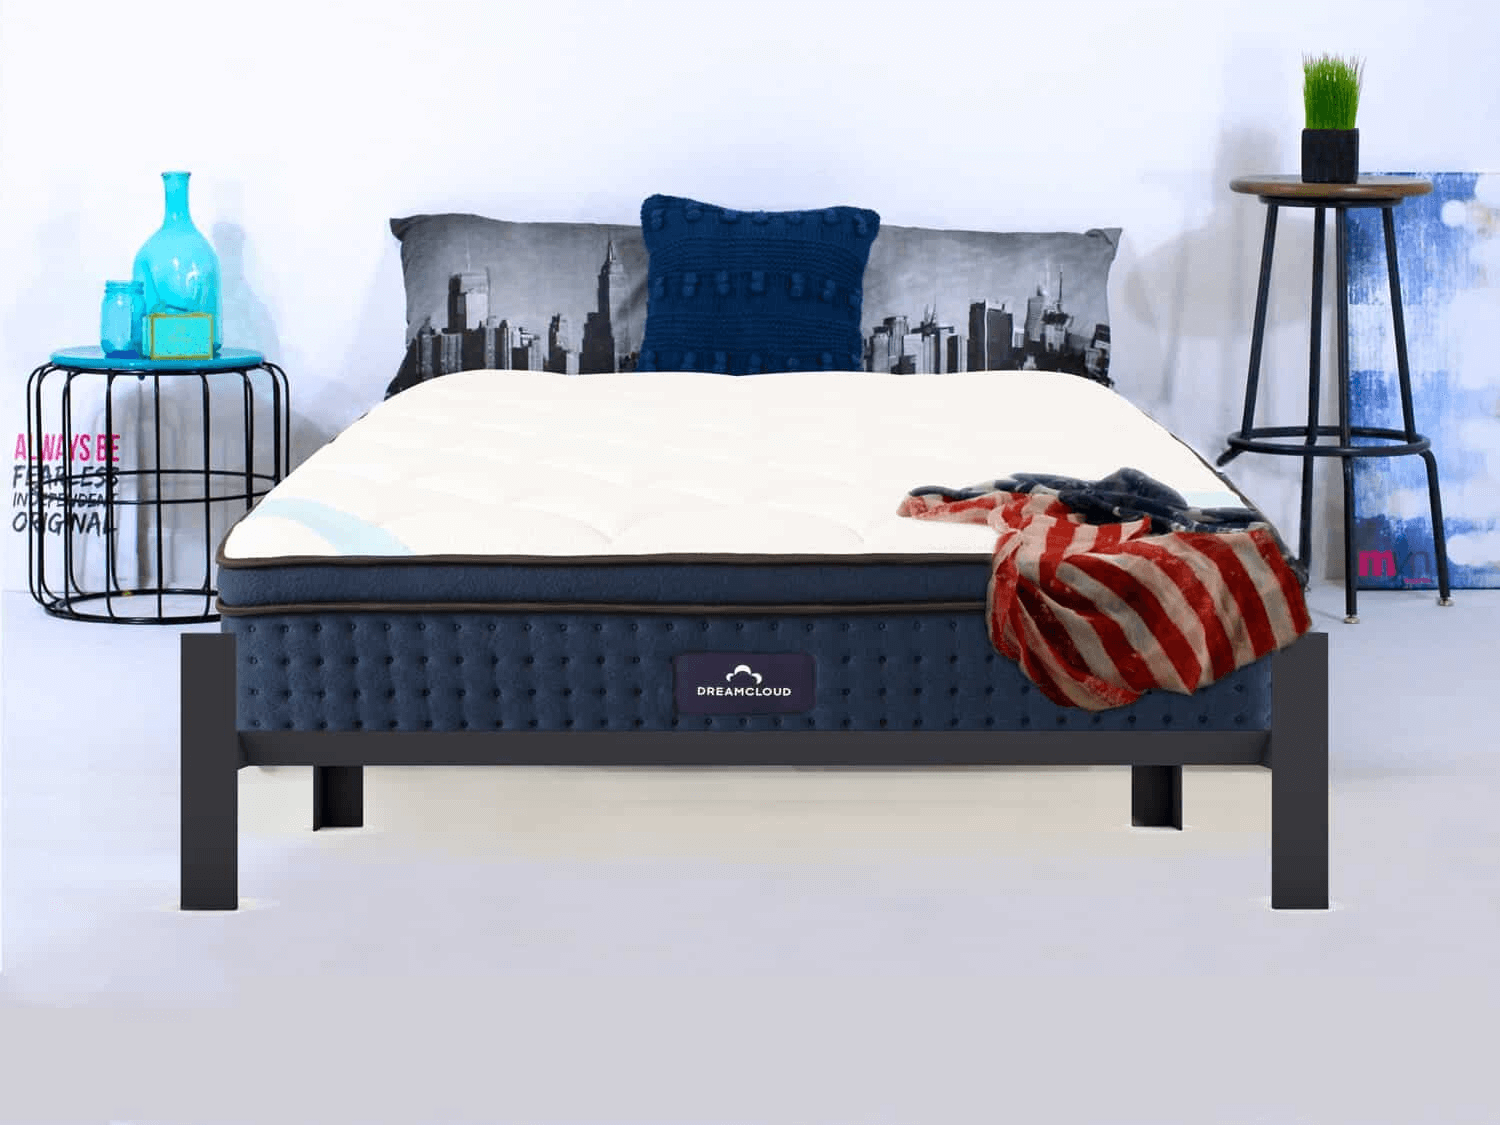 DreamCloud mattresses are also charged at affordable prices